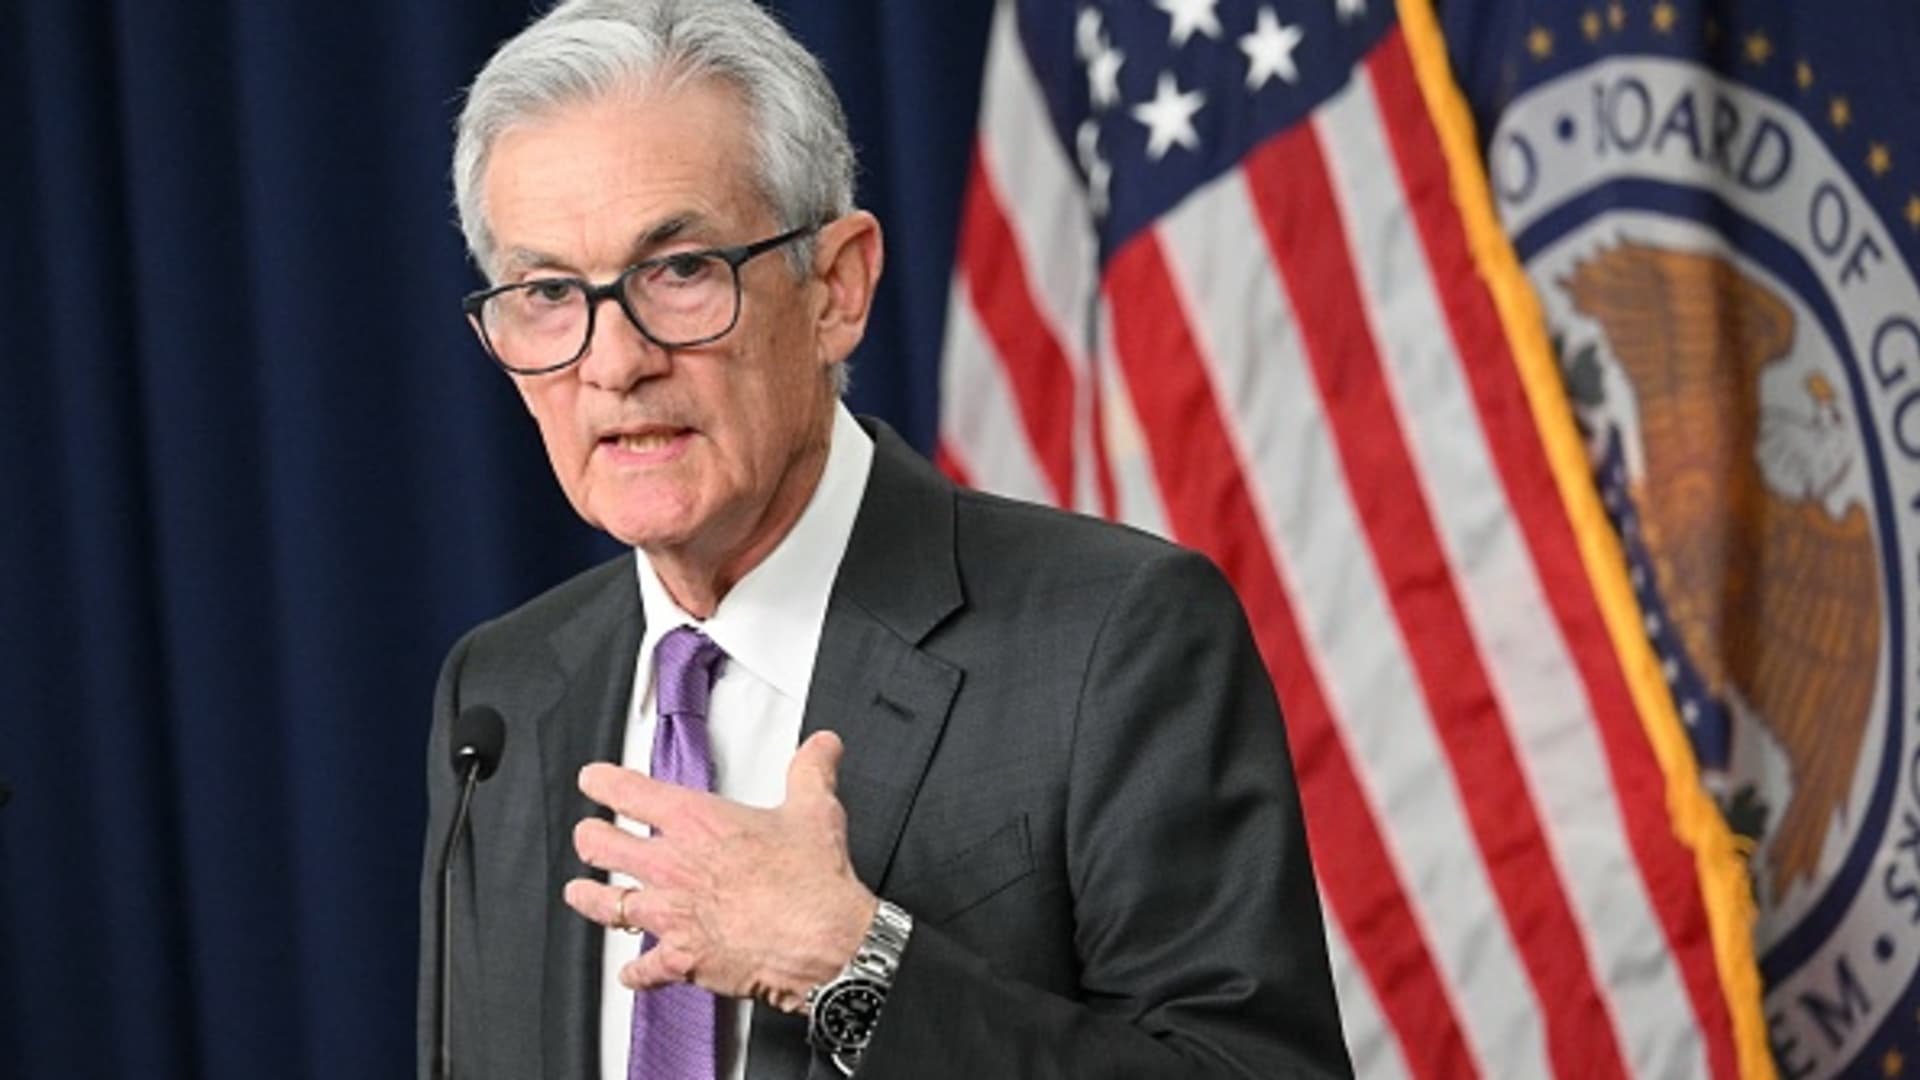 Fed holds rate steady and moves to ease the pace of balance sheet reduction